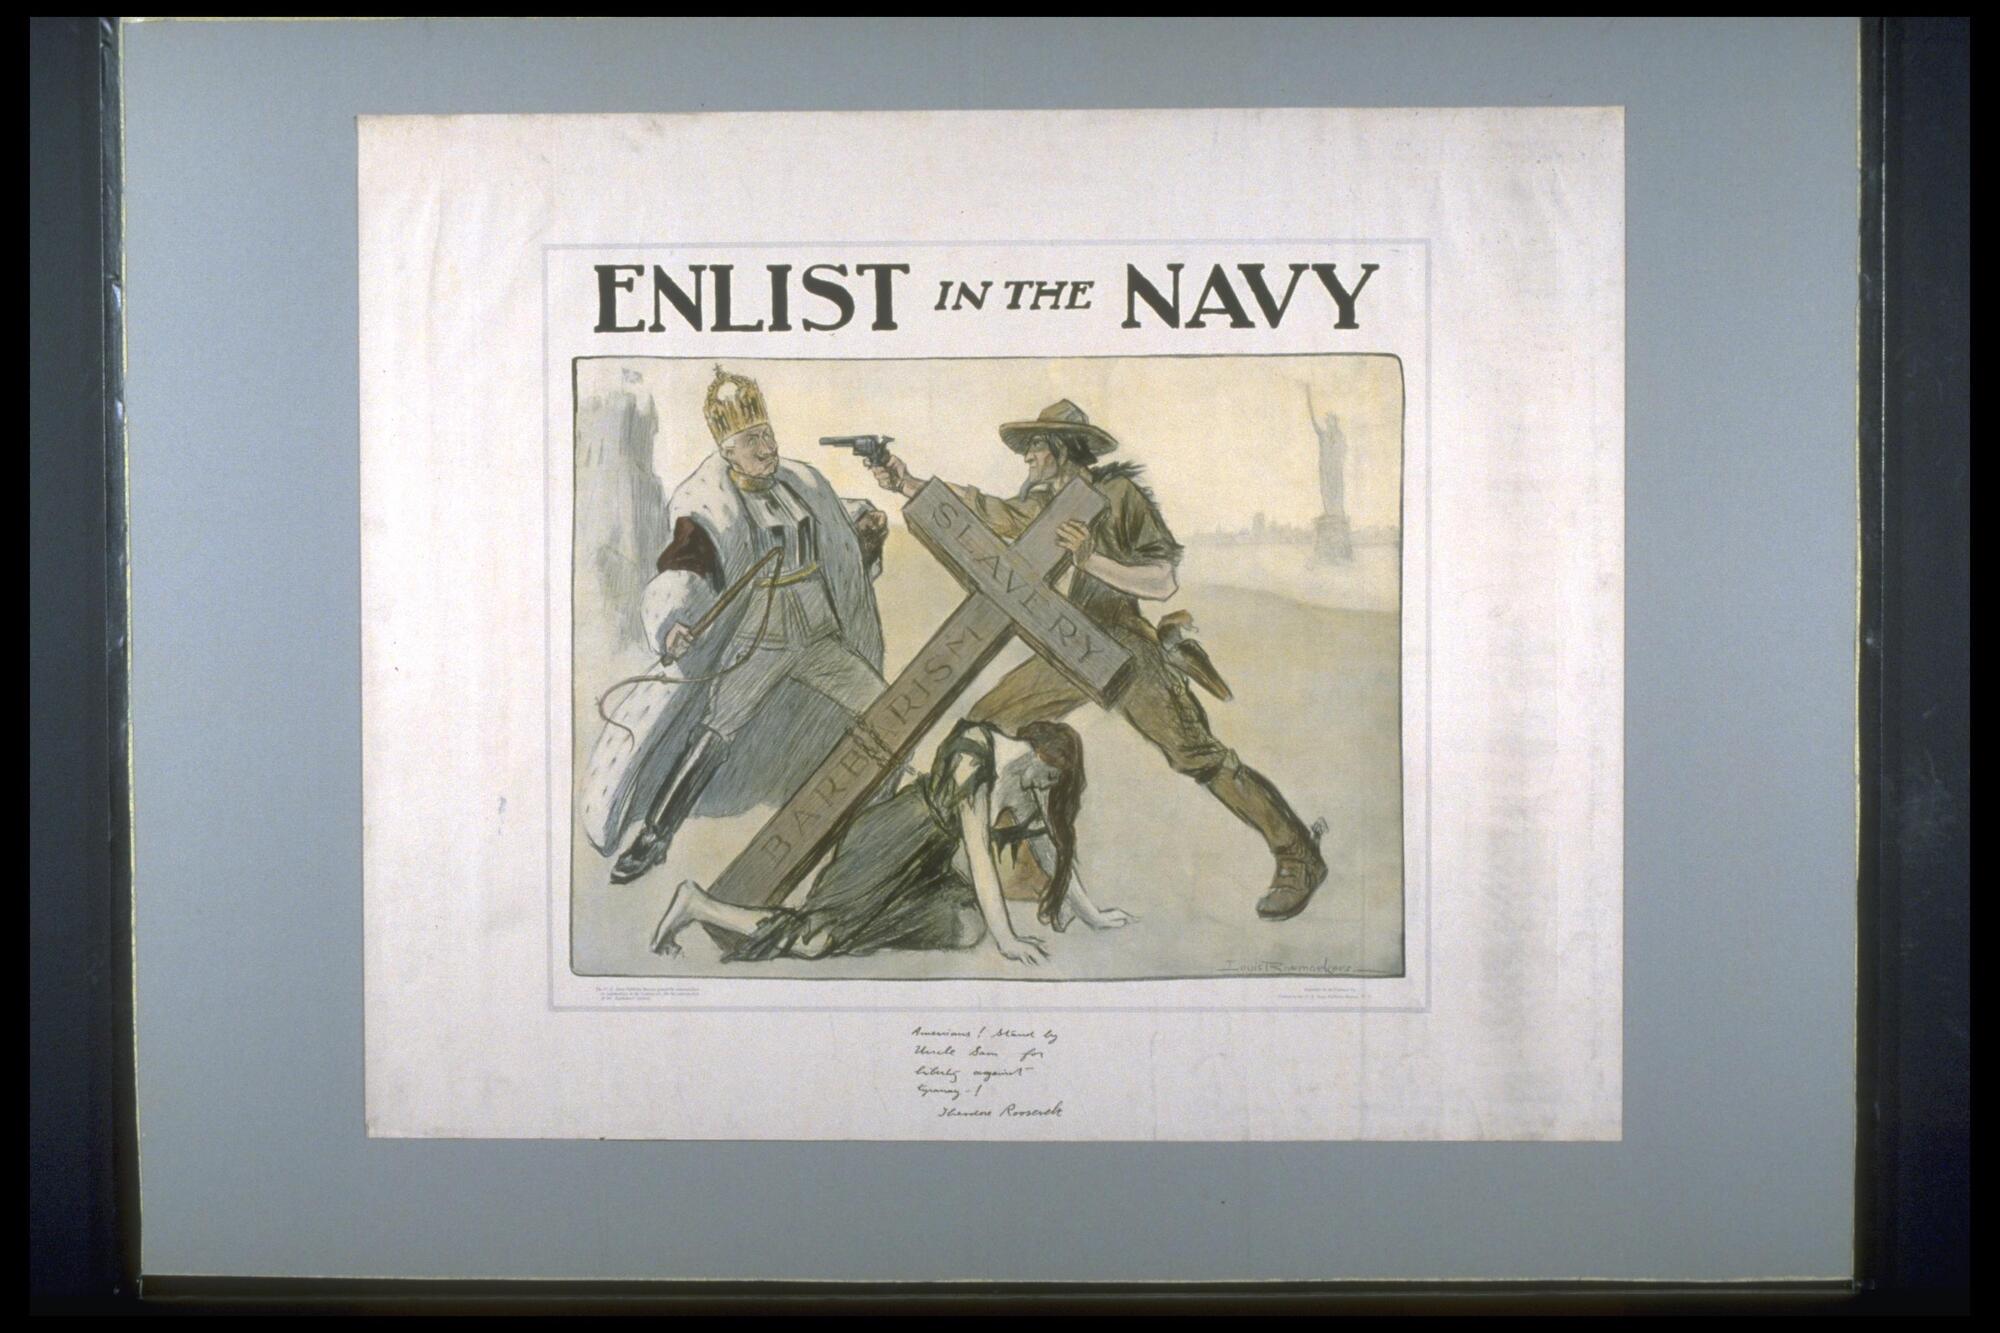 Text: Enlist in the Navy - (fascimile script below) Americans! Stand by Uncle Sam for Liberty against Tyranny! Theodore Roosevelt - (text on cross in image ) Slavery Barbarism